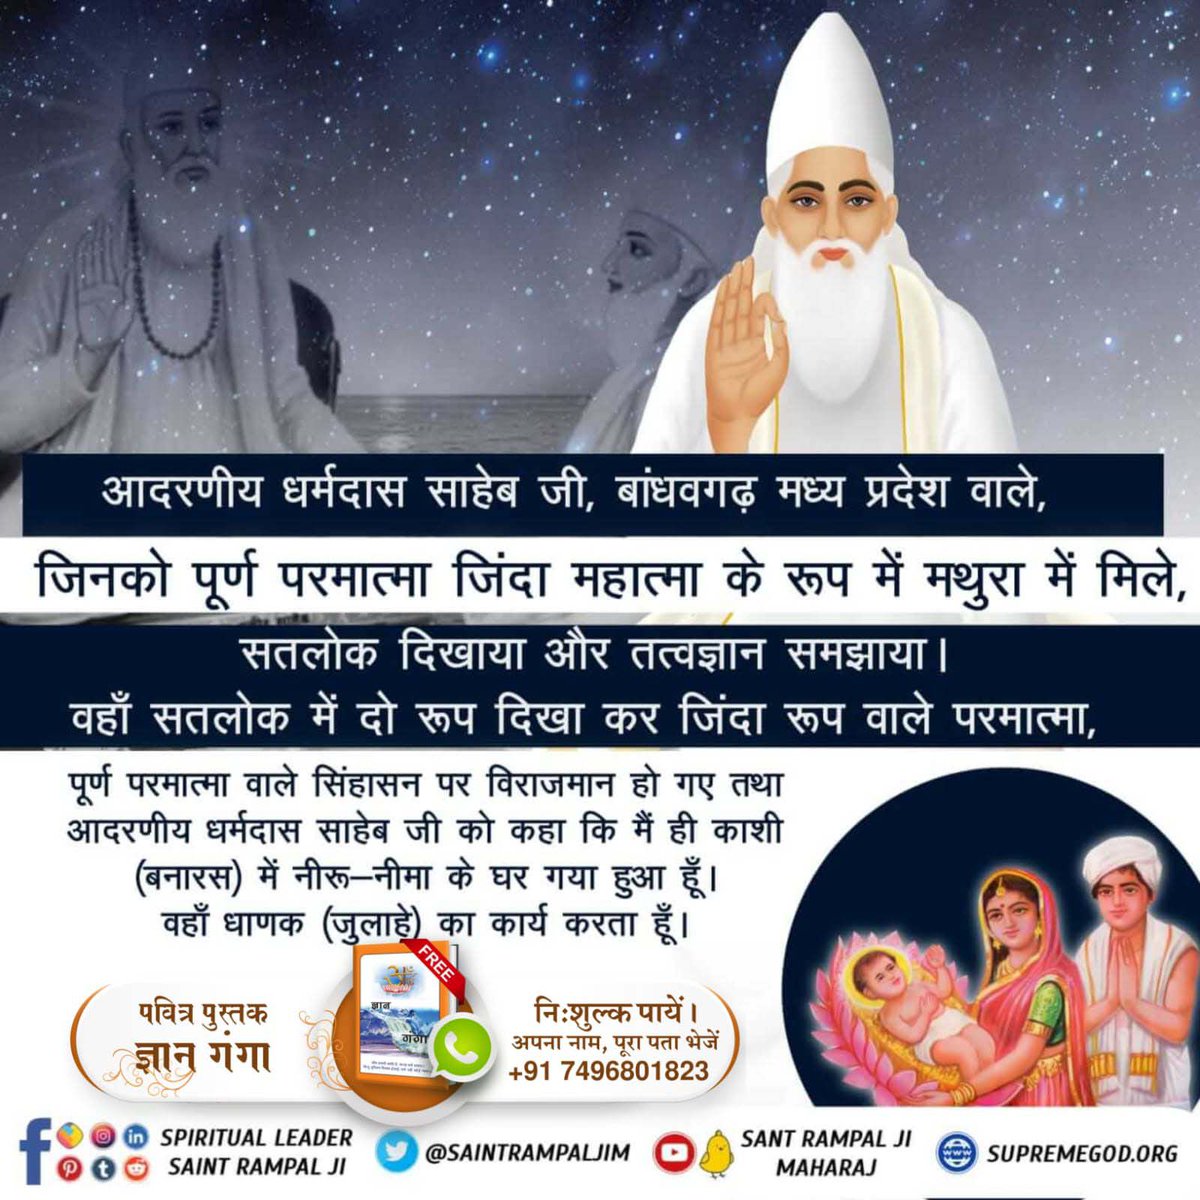 #आँखों_देखा_भगवान_को
Respected Dharamdas Saheb ji, from Bandhavgarh Madhya Pradesh,

Those who found the Supreme God in the form of a living Mahatma in Mathura,

Showed Satlok and explained the philosophy.